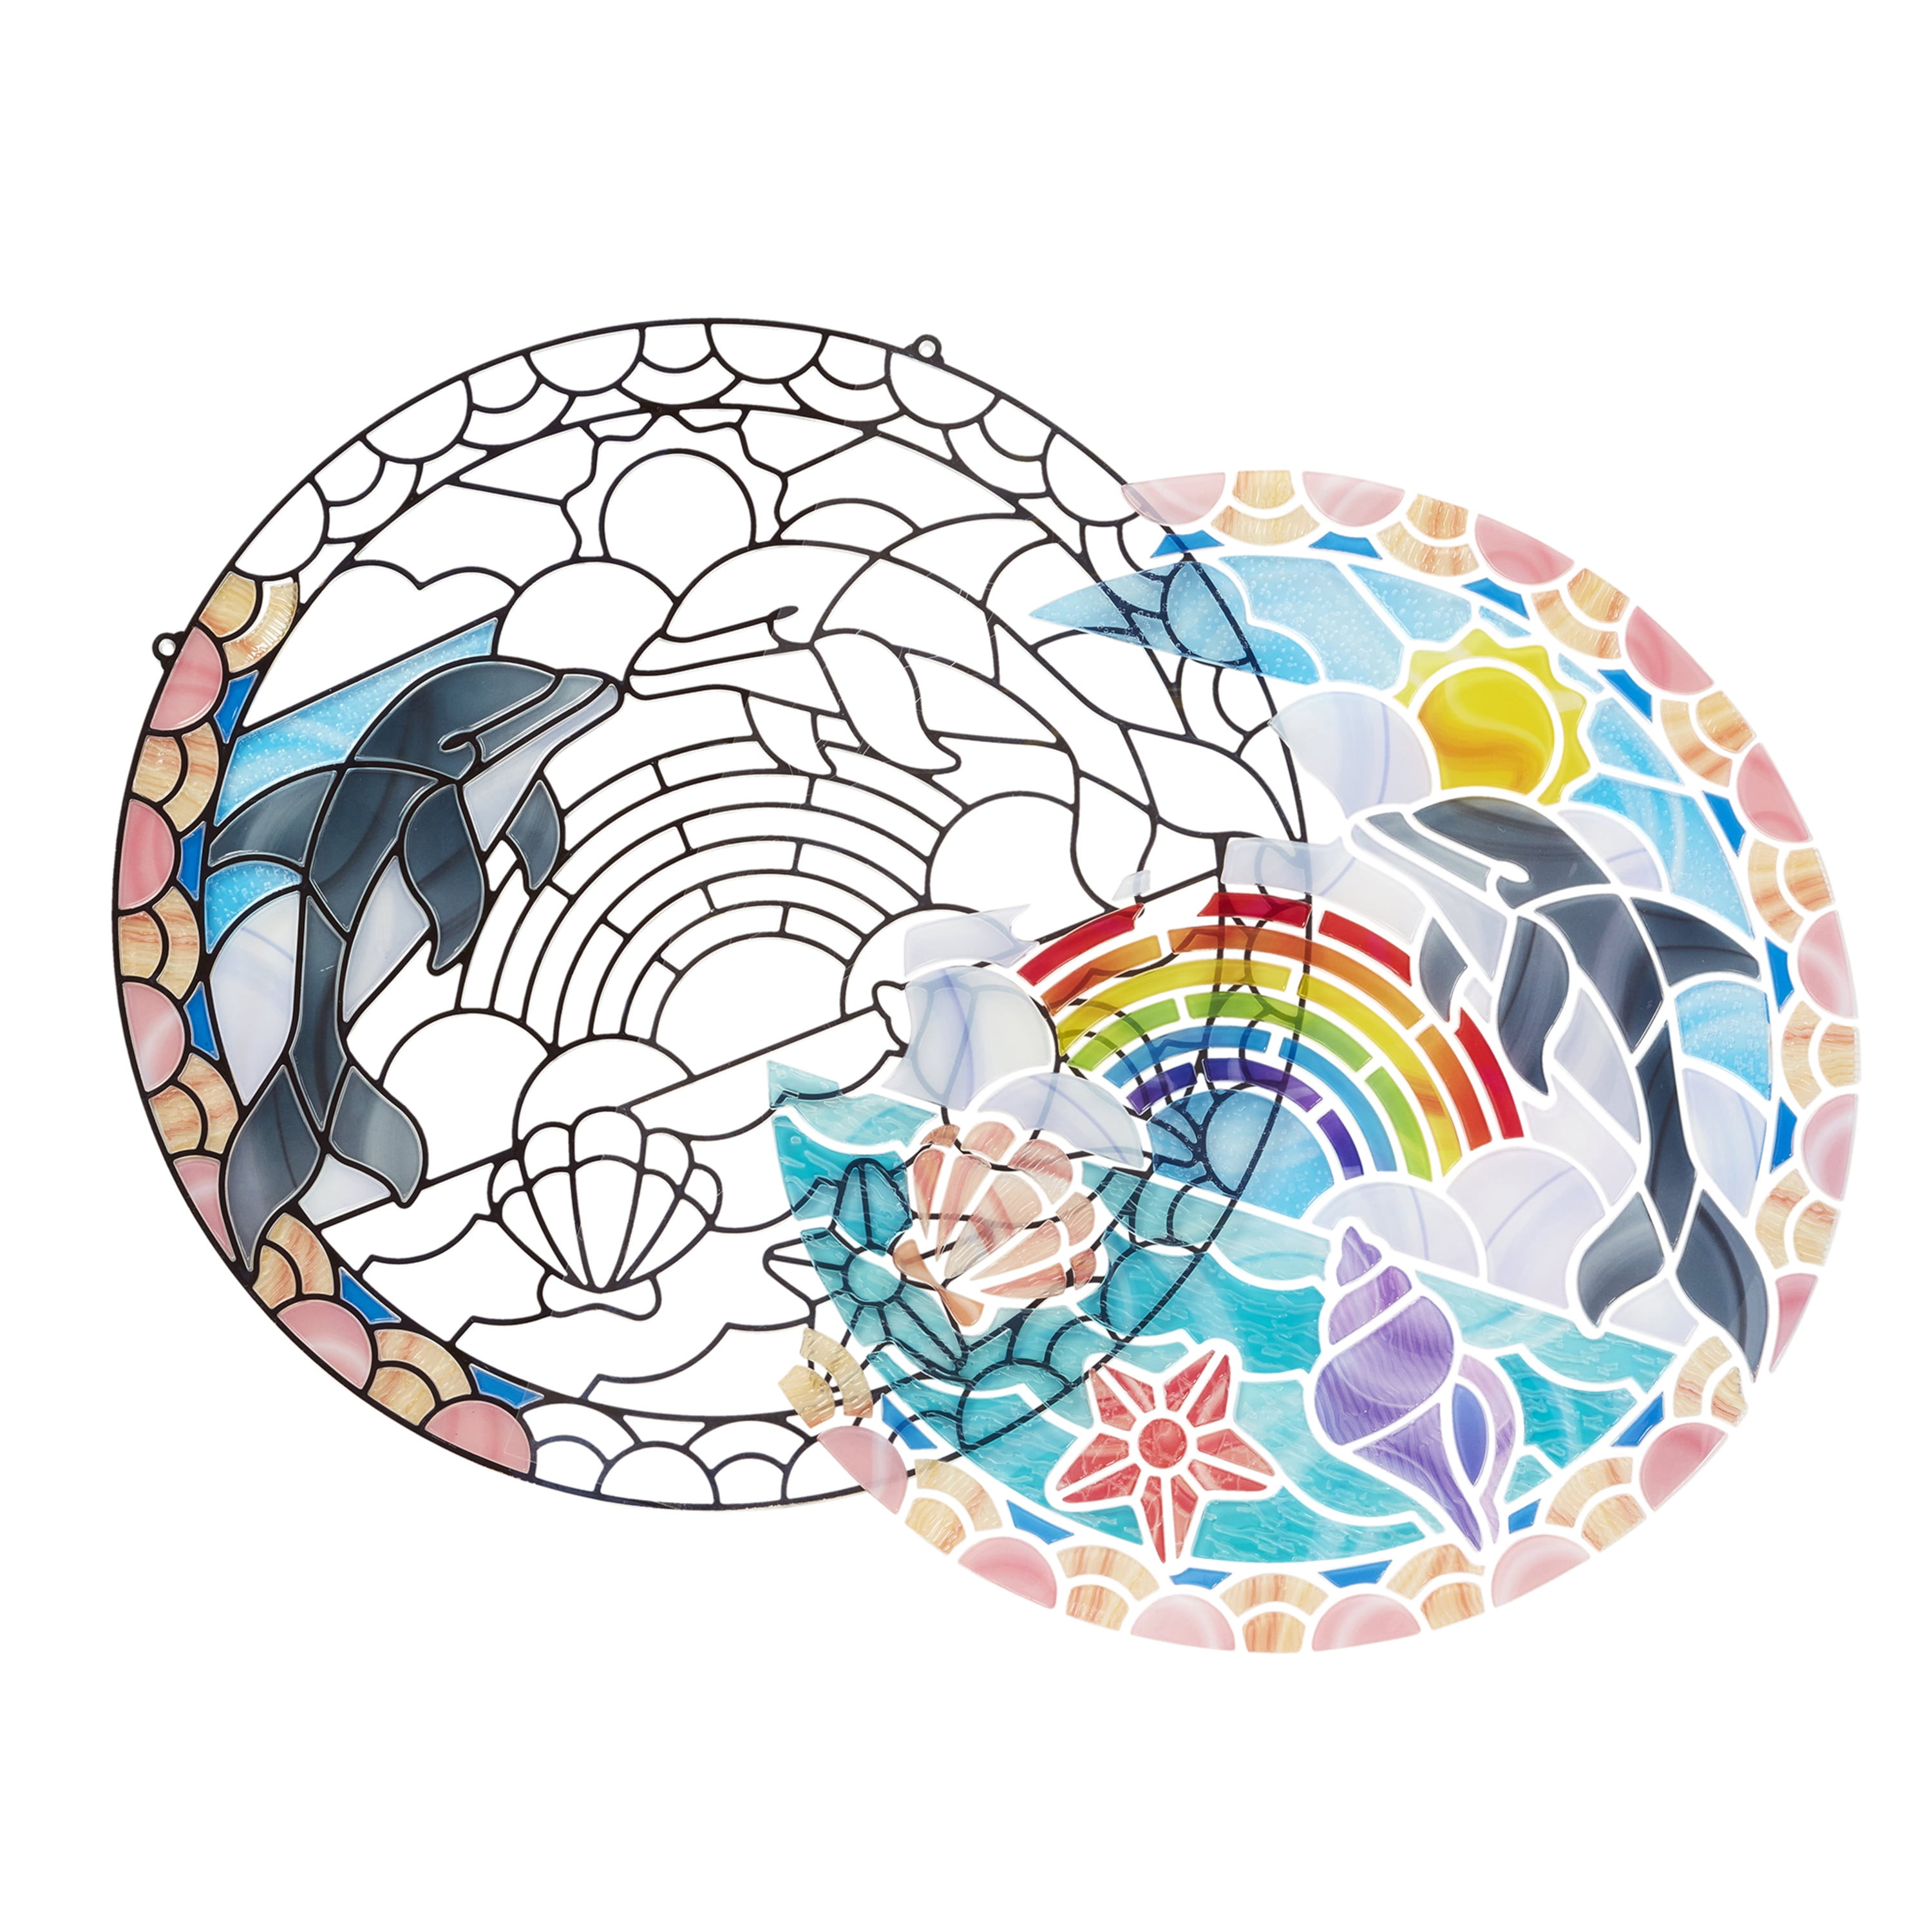 Melissa & Doug Stained Glass Made Easy Activity Kit: Mermaids - 140+  Stickers - Kids Sticker Stained Glass Craft Kit; Mermaid Crafts For Kids  Ages 5+